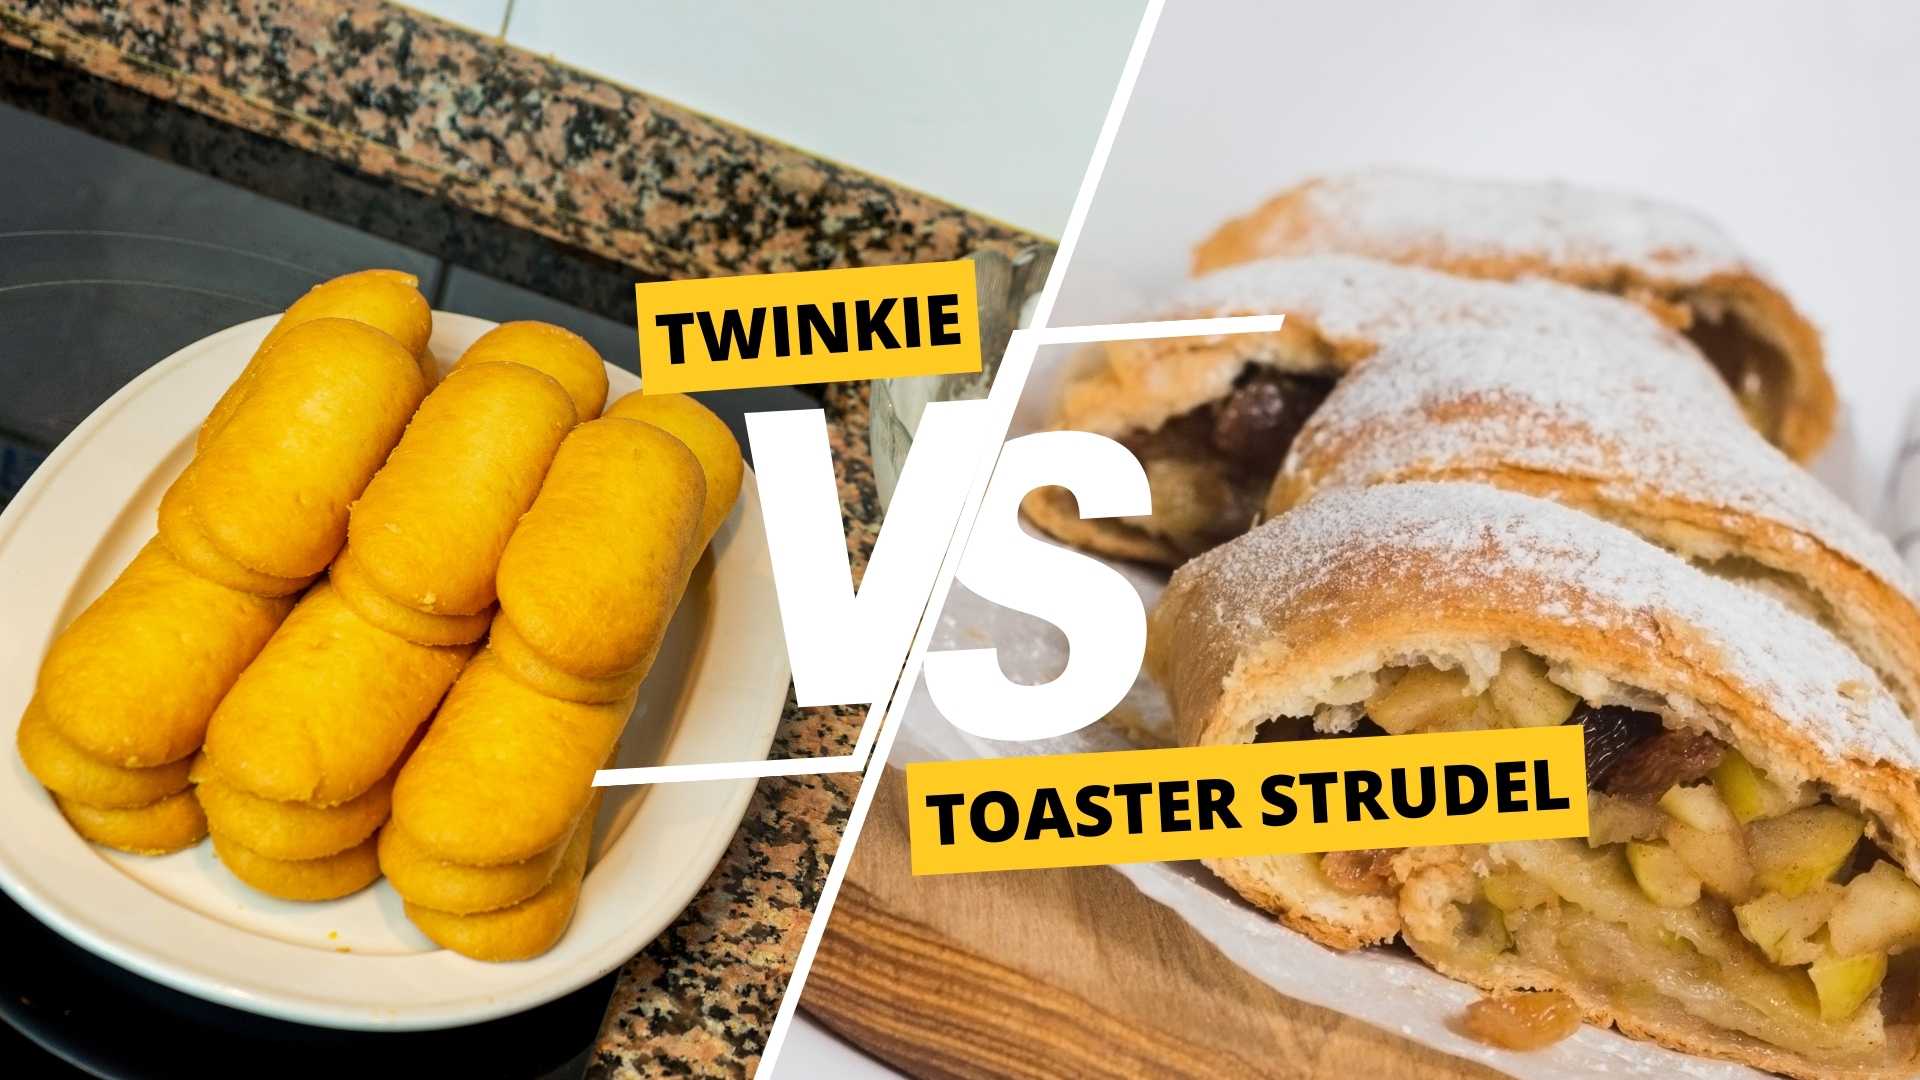 Twinkie vs Toaster Strudel: Which Pastry is Worth the Calories?